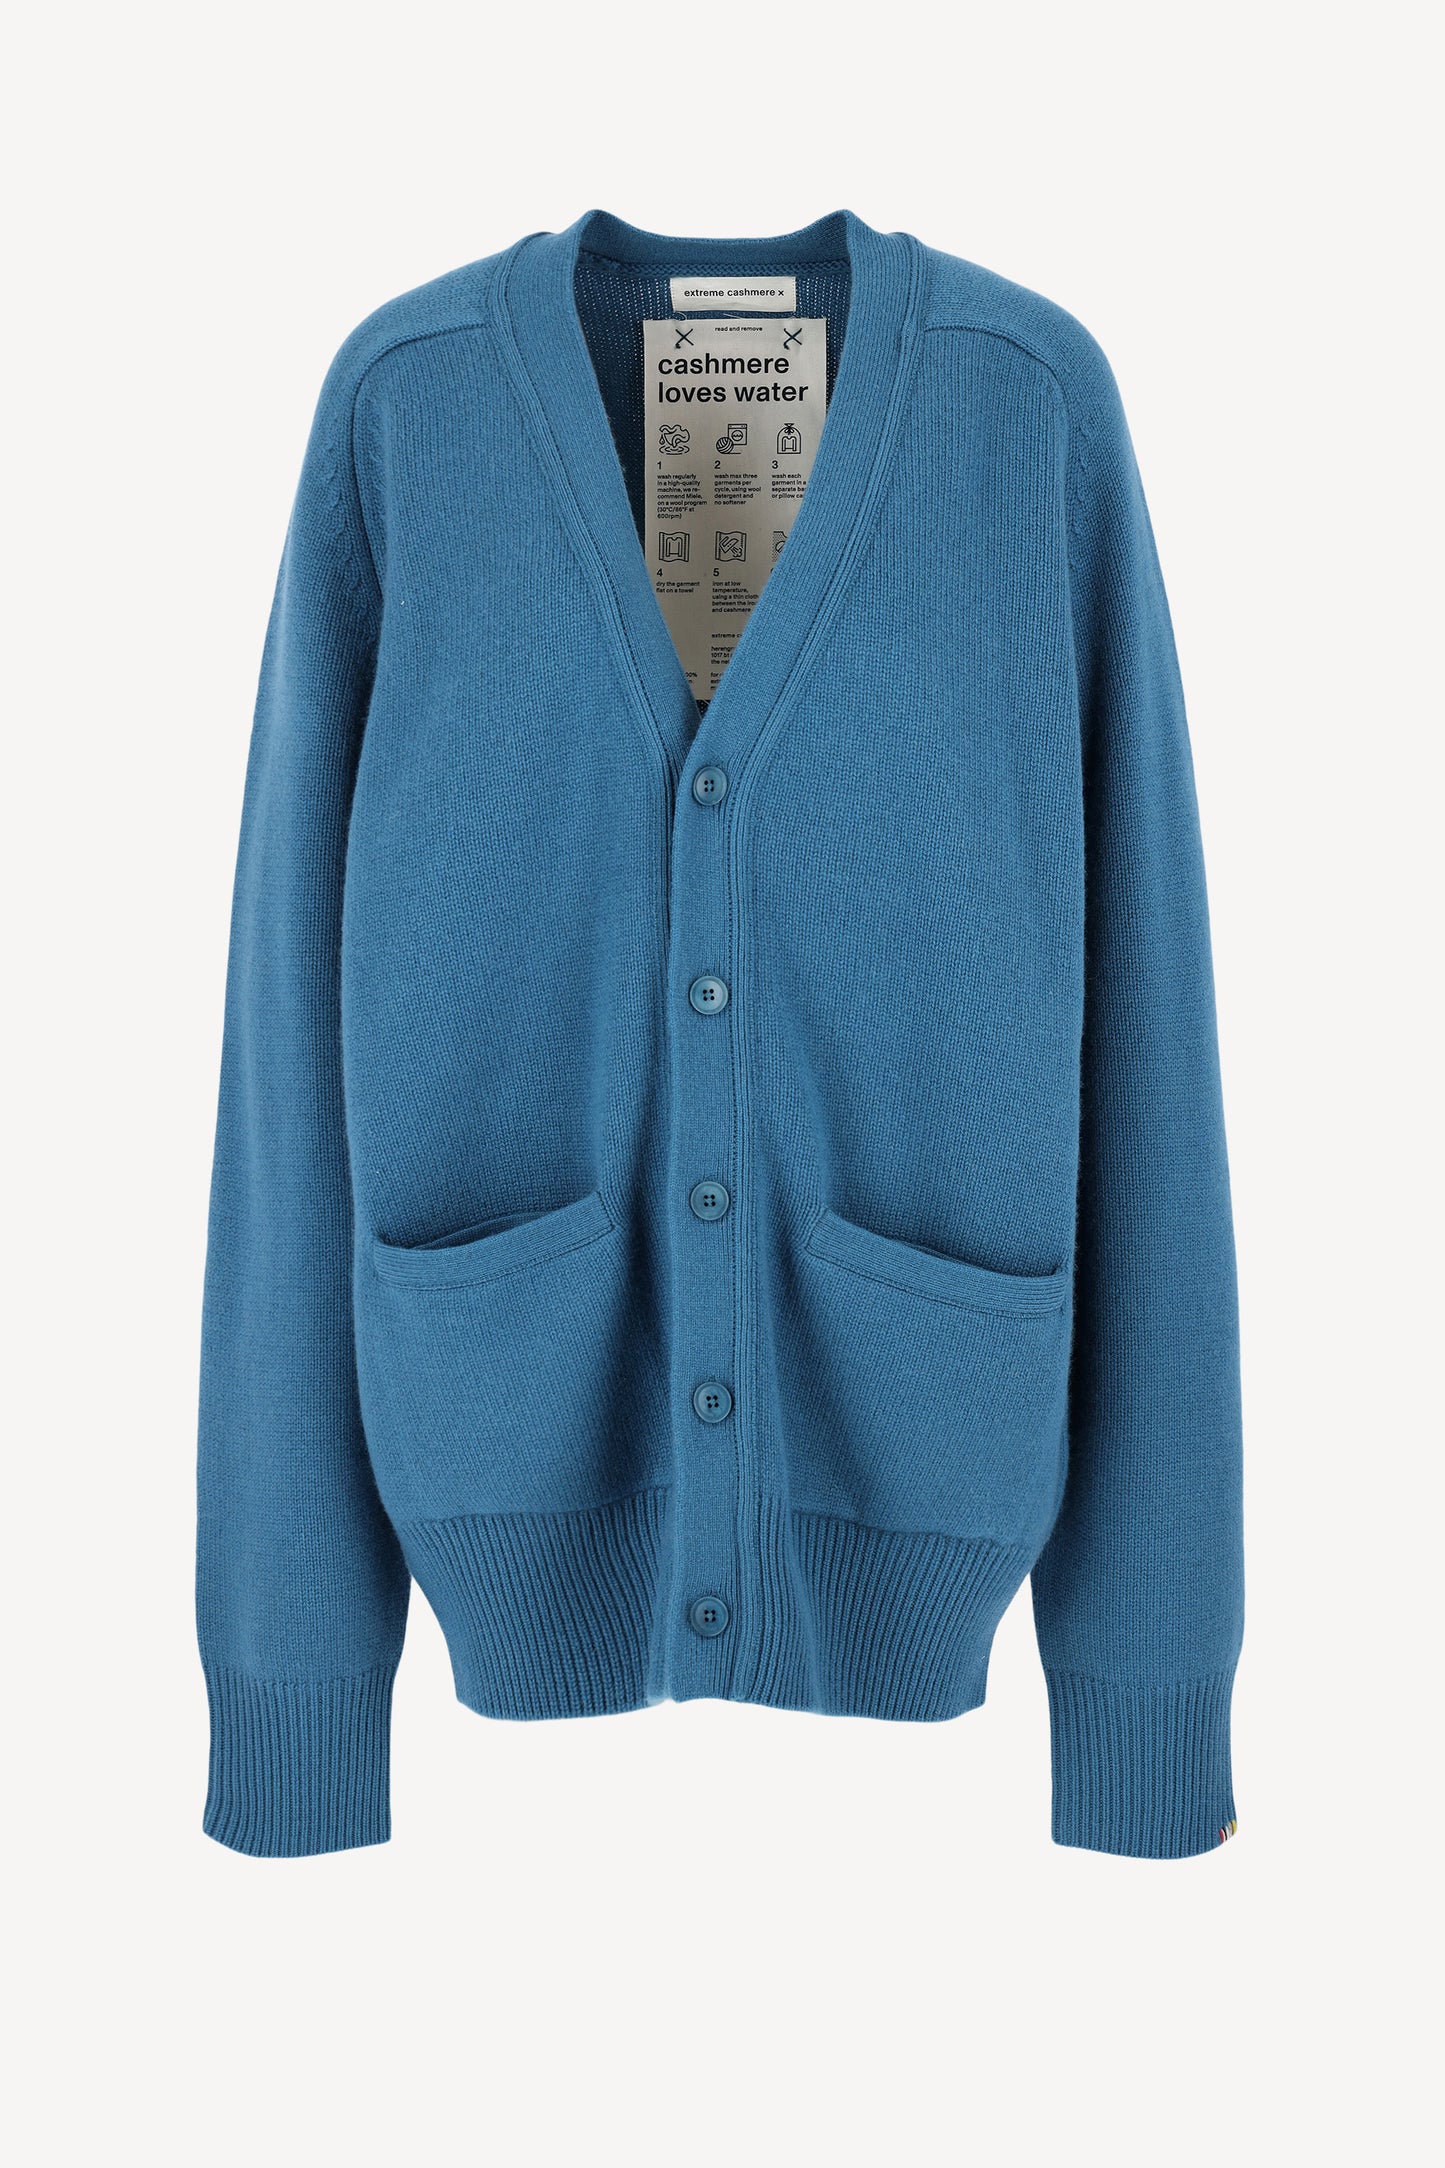 Cardigan Papilli N° 244 in AguaExtreme Cashmere - Anita Hass